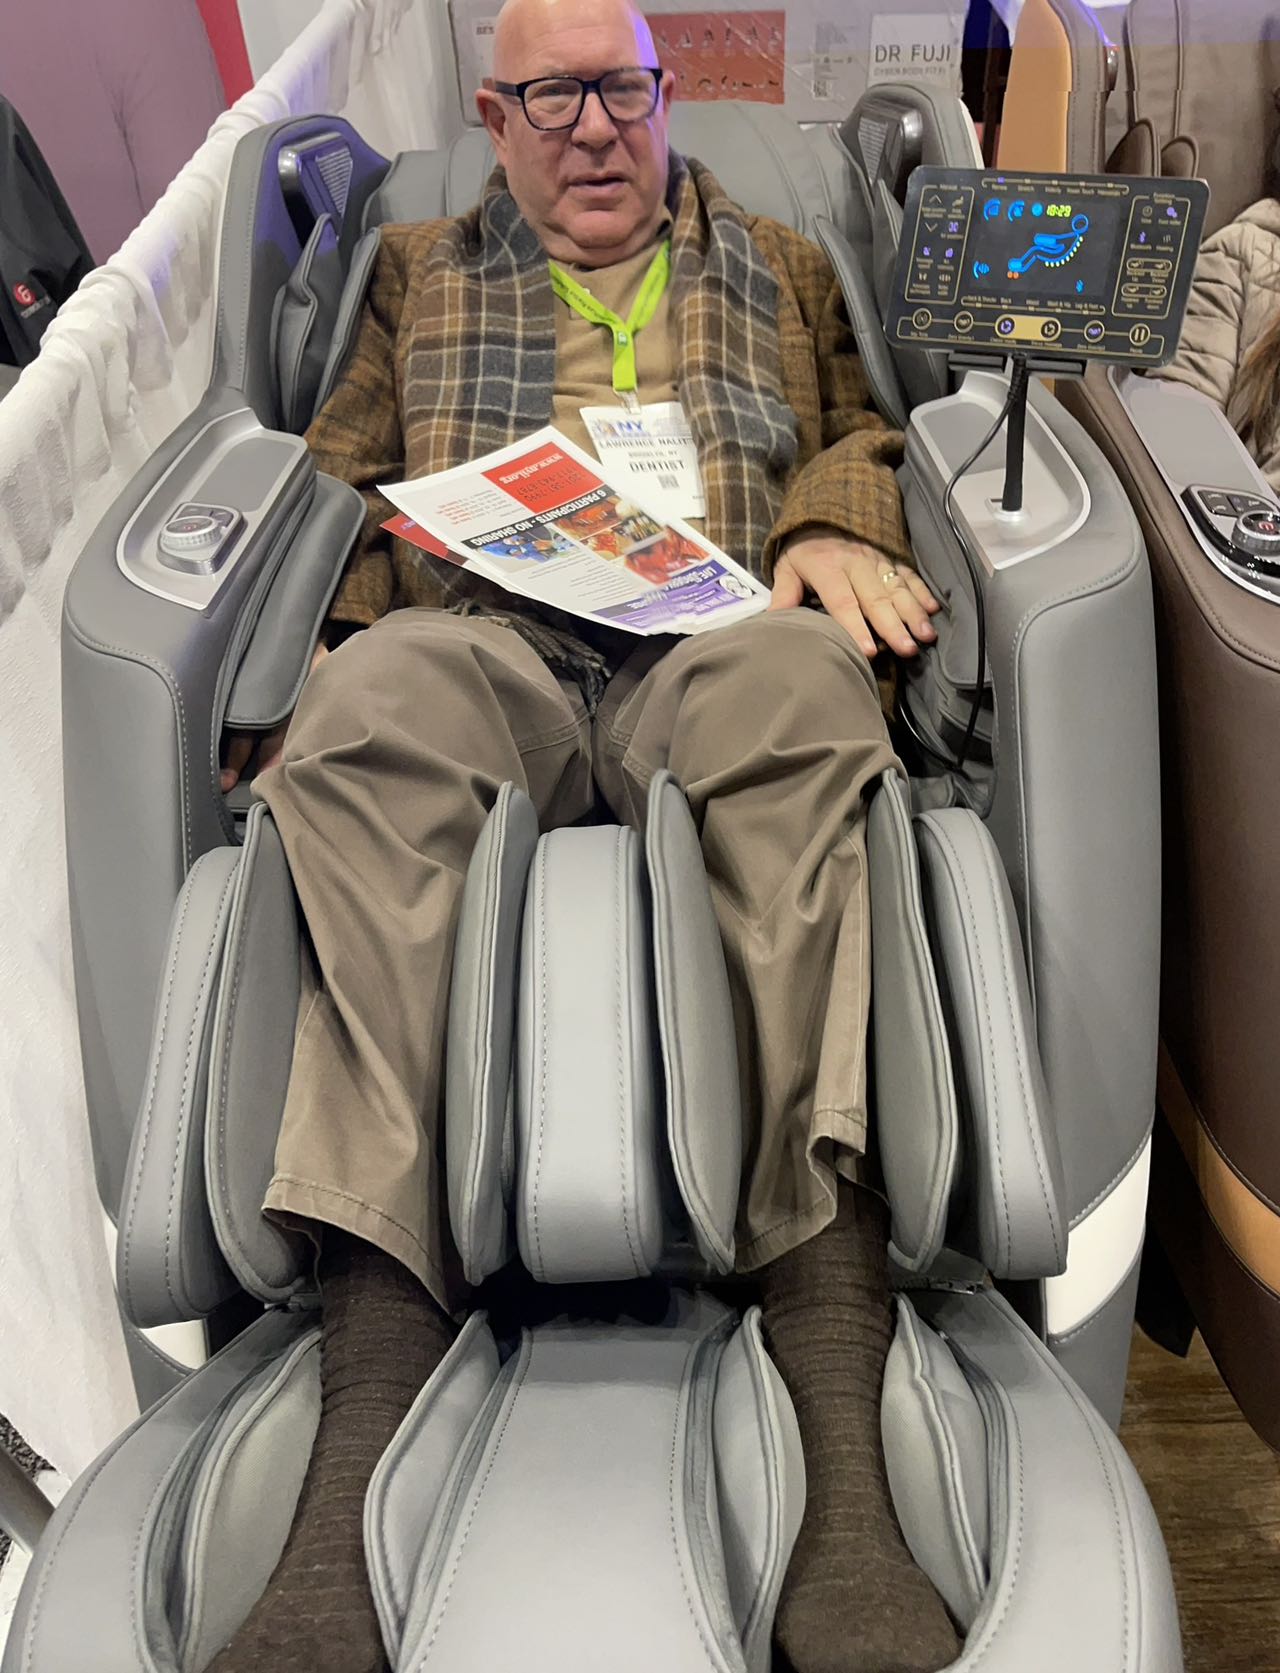 drfuji message chairs at trade shows